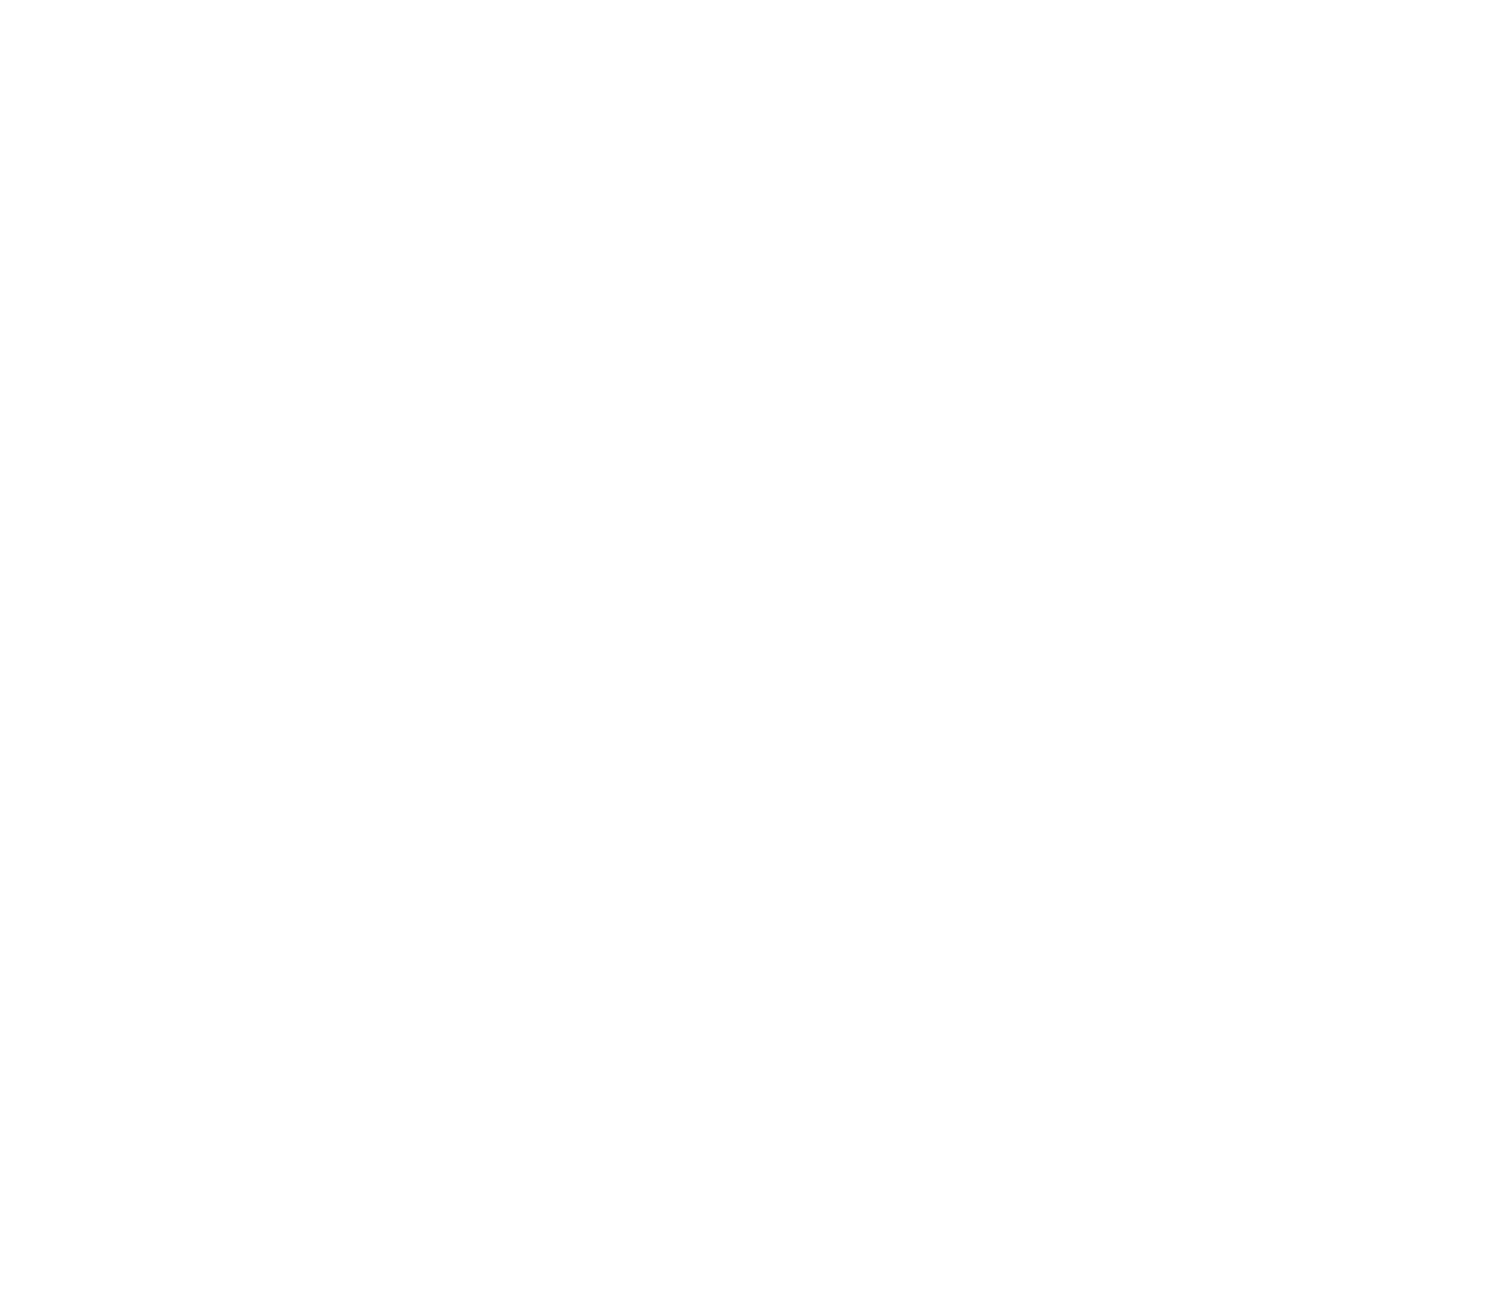 ITC logo for dark backgrounds (transparent PNG)